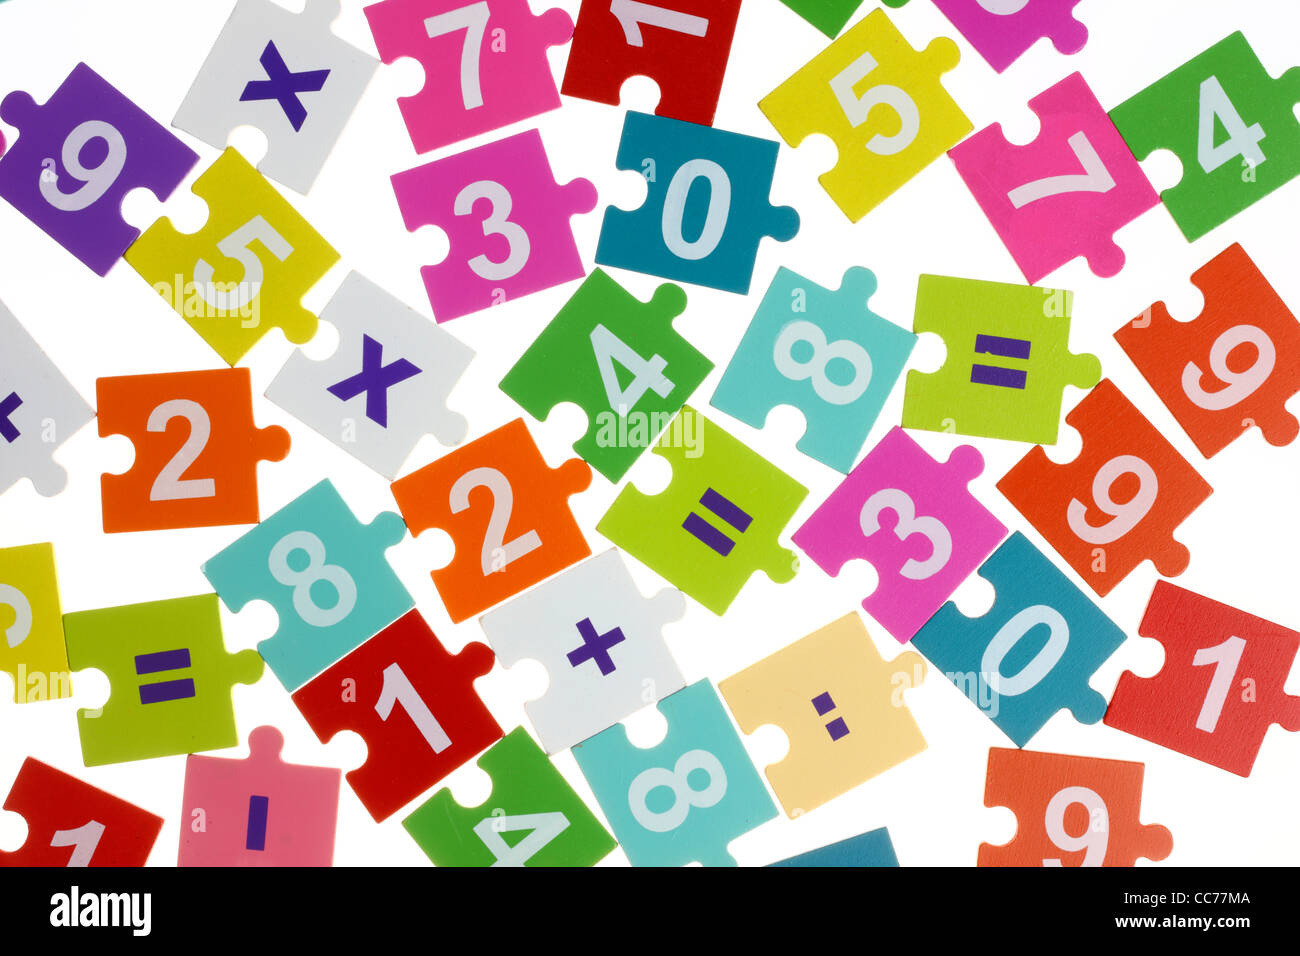 Mathematics puzzle, for kids. To learn mathematics while playing, basic arithmetic operations. Stock Photo